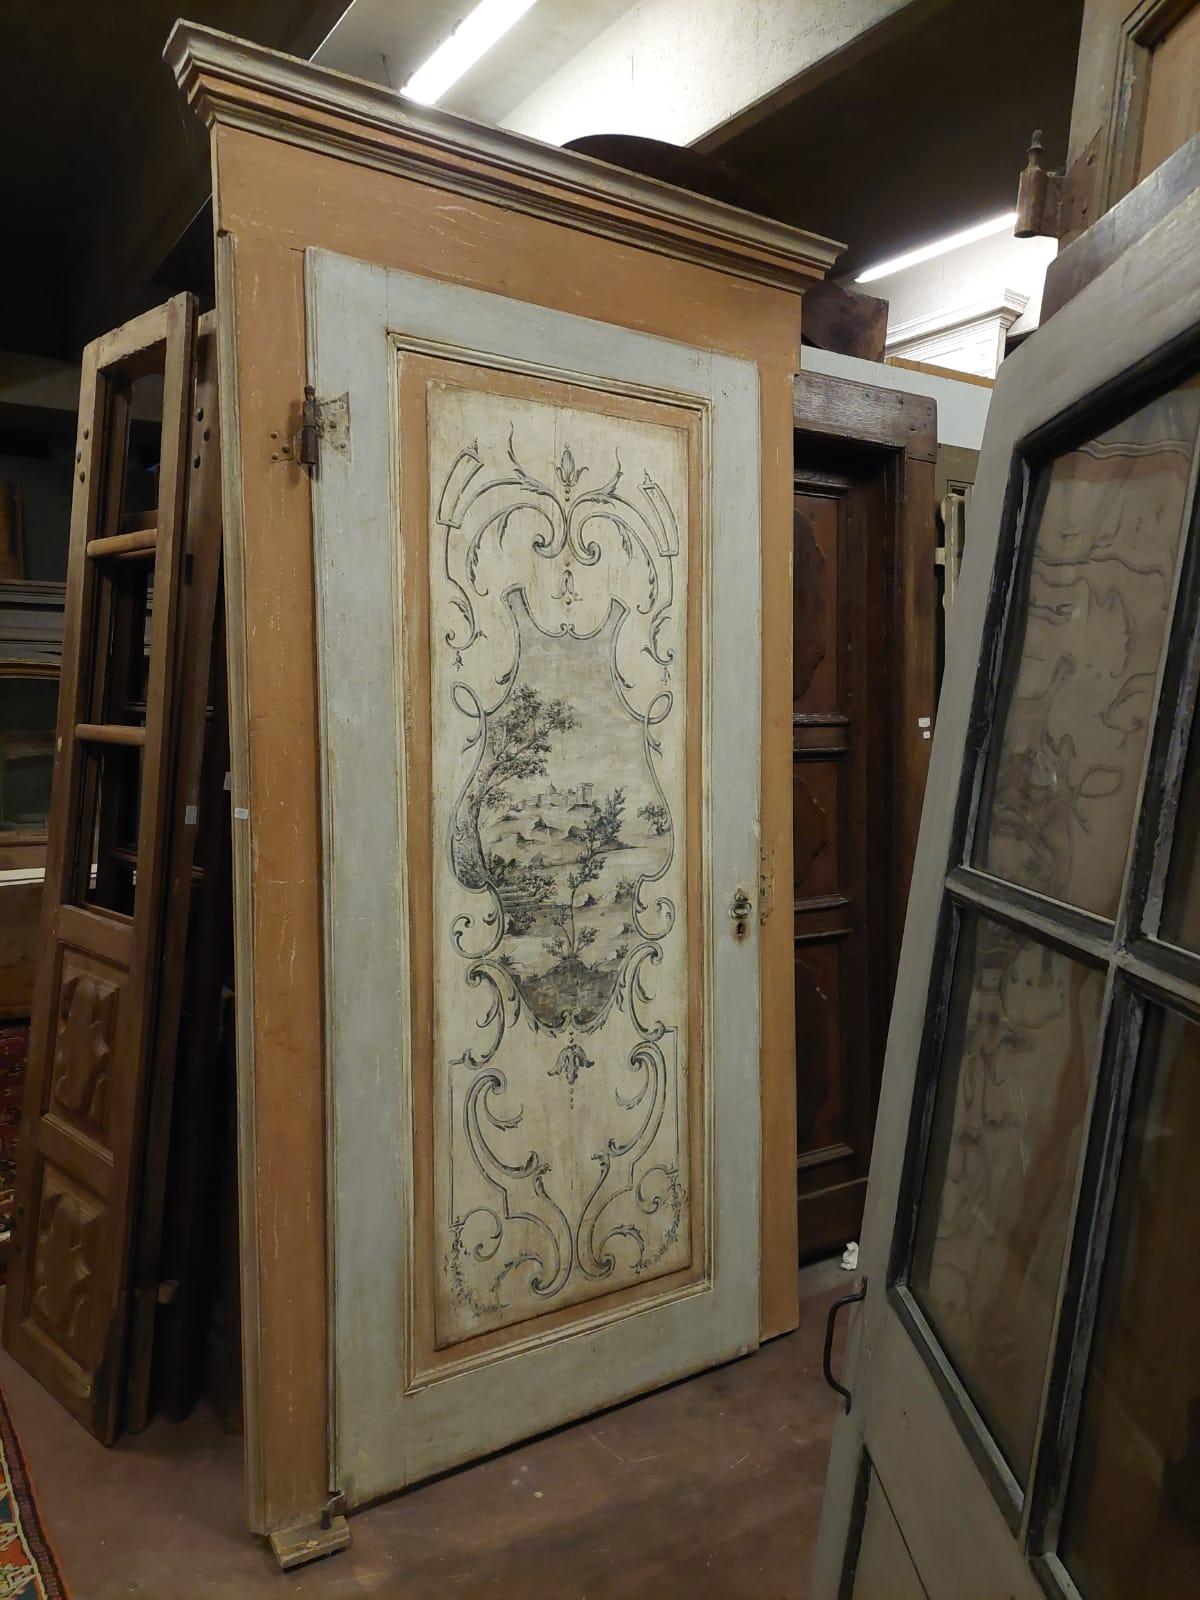 Italian Antique Door Lacquered and Painted with Frame, 18th Century Rome, 'Italy' For Sale